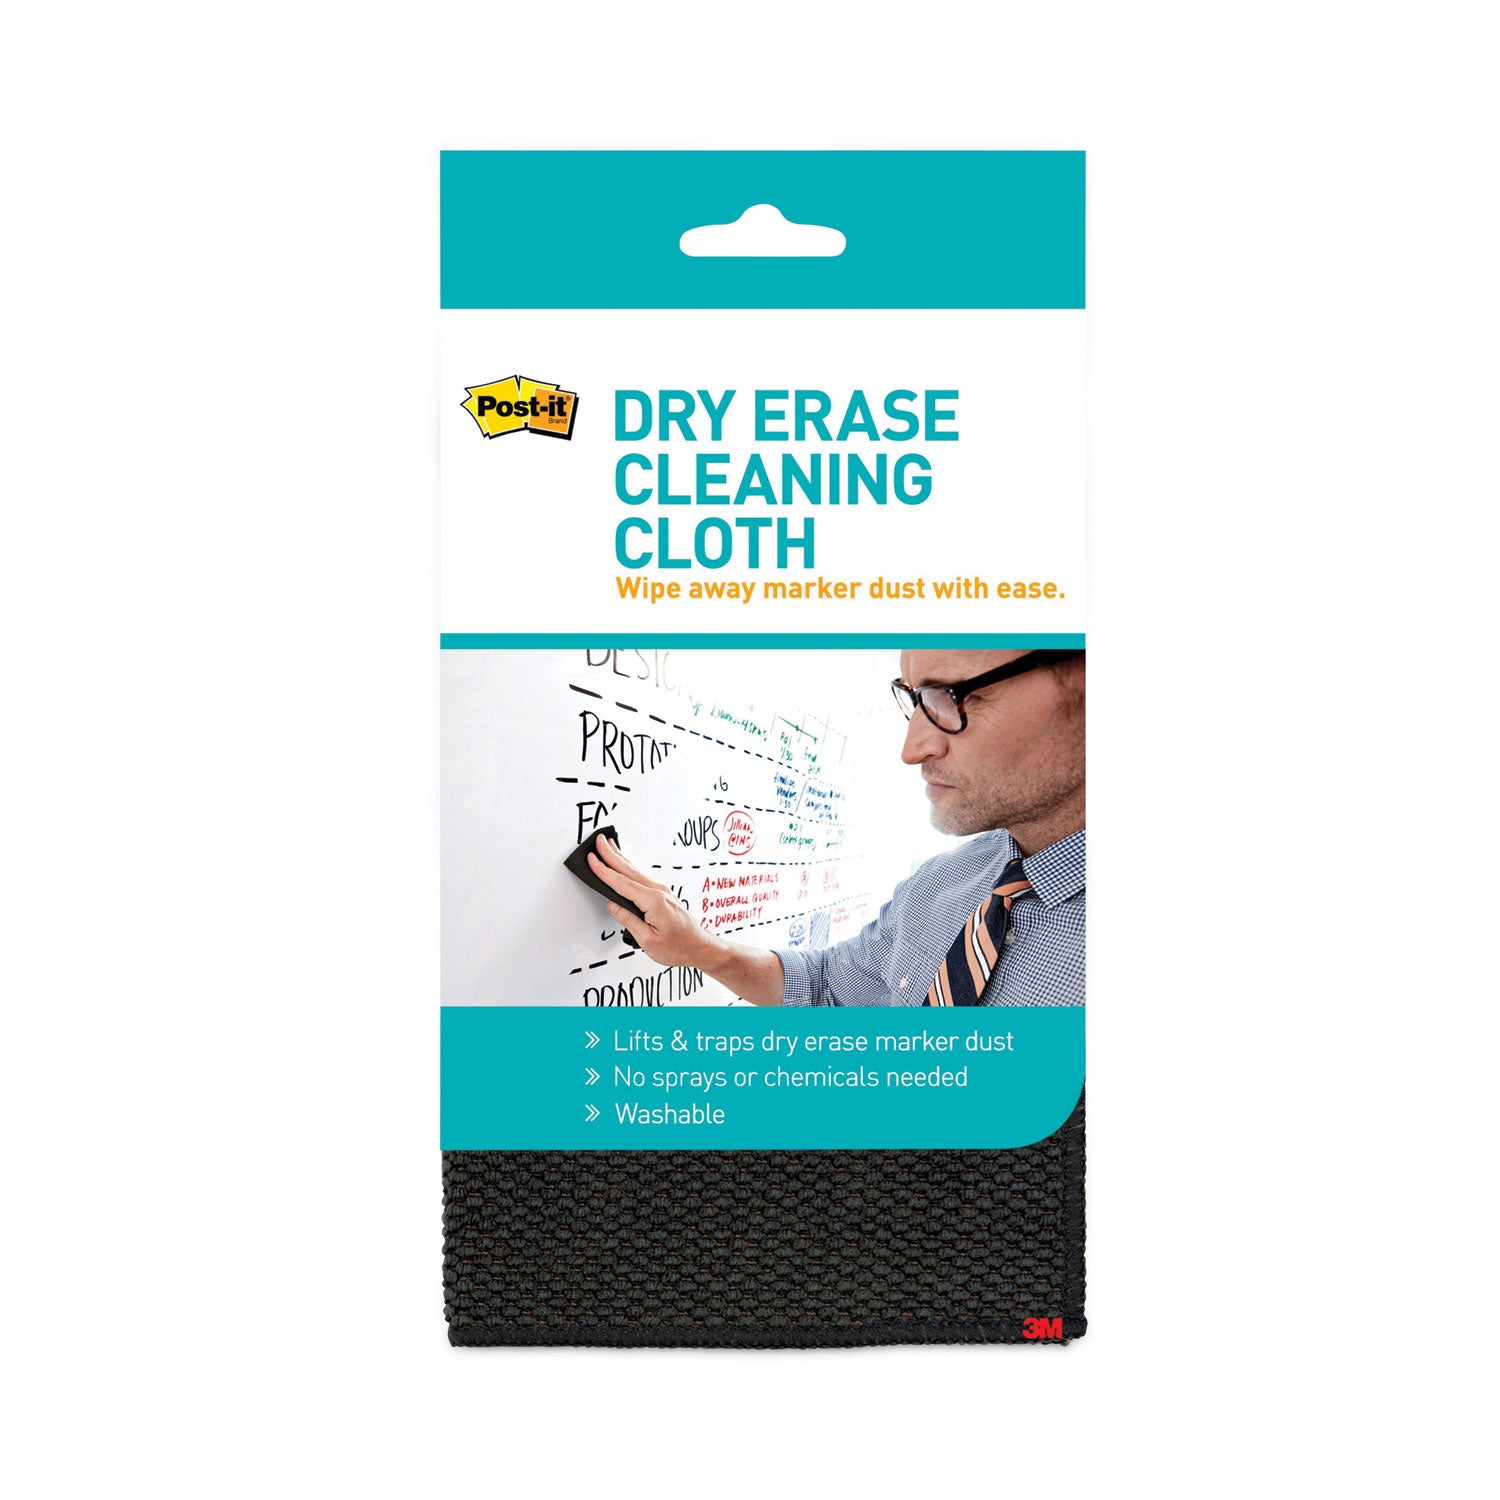 Dry Erase Cleaning Cloth, 10.63" x 10.63 - 